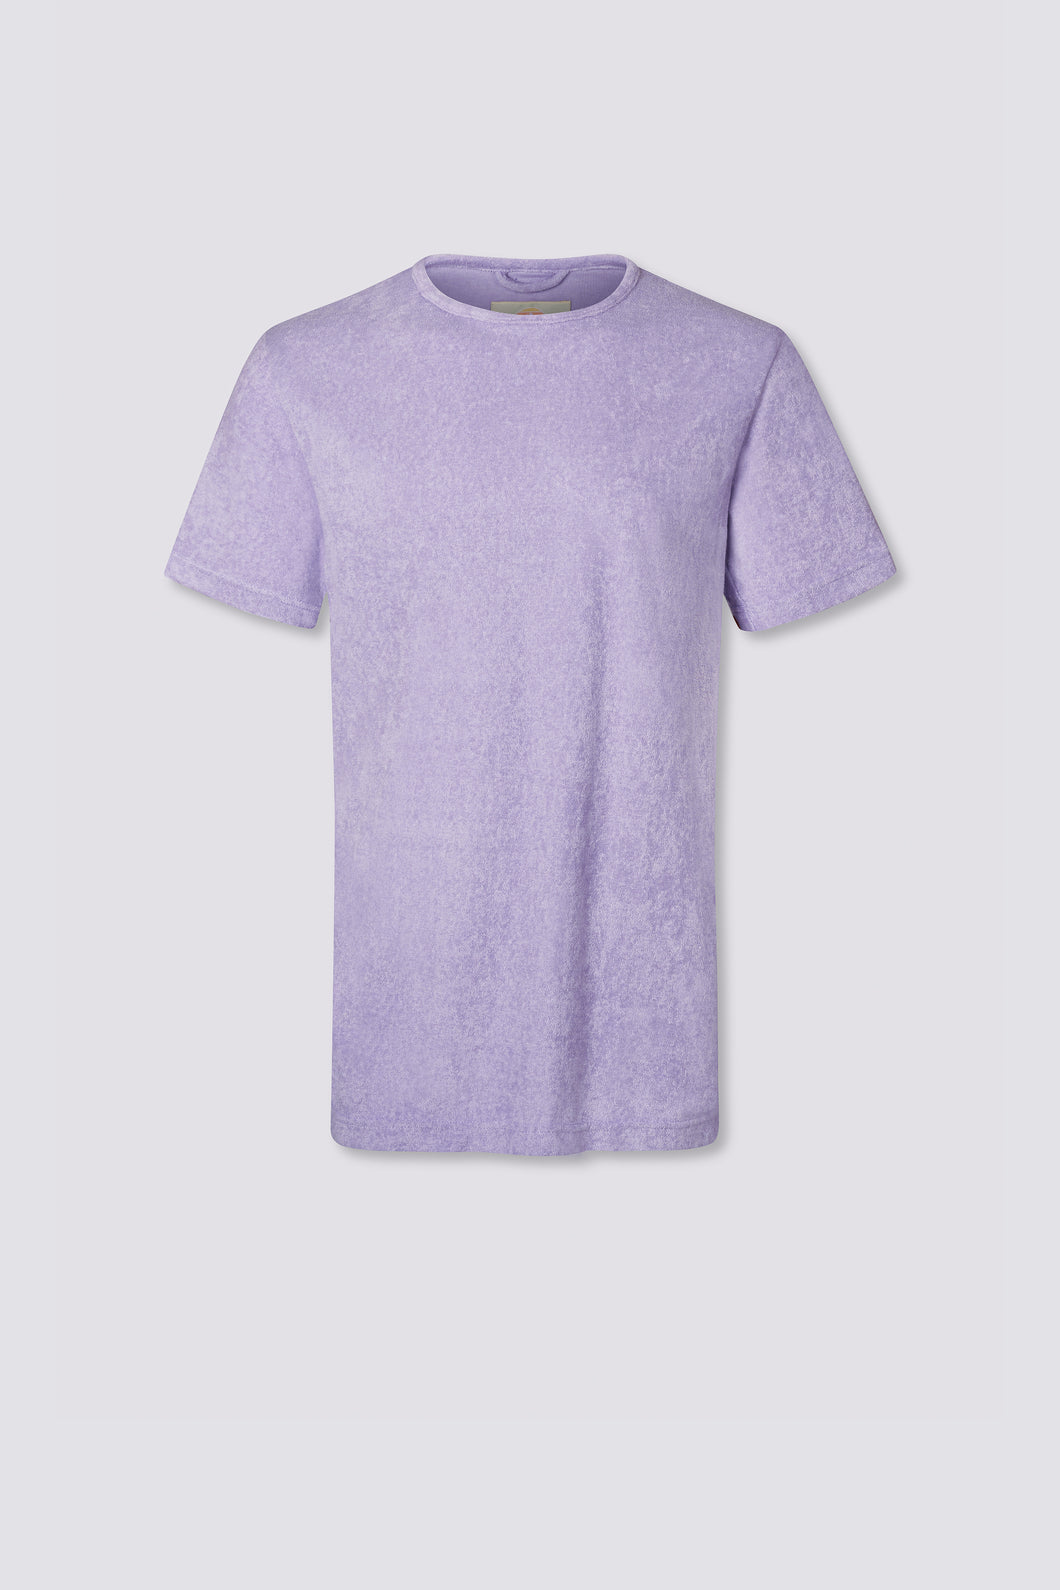 Terry Cloth Shirt - French Lavender